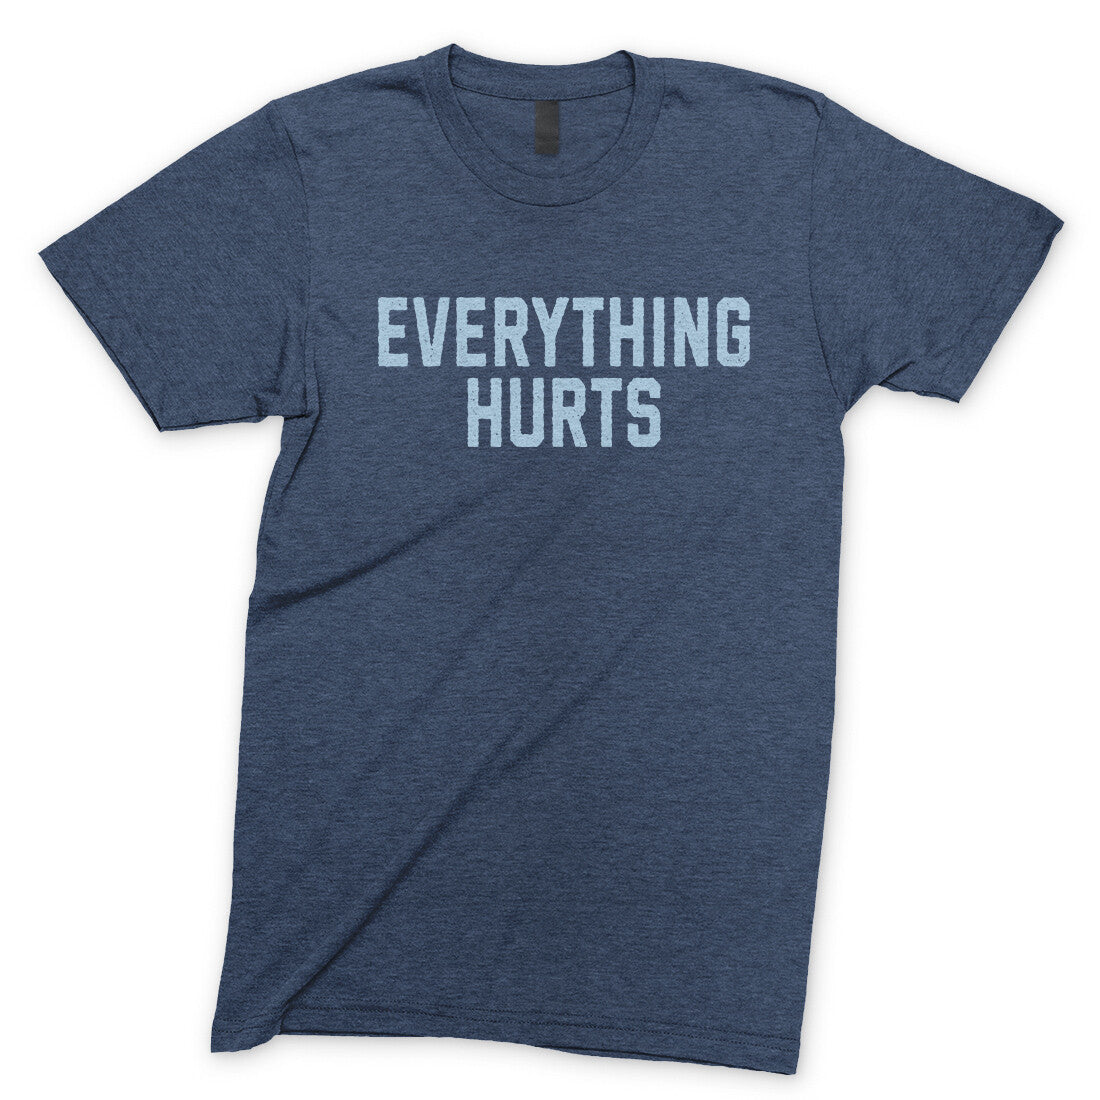 Everything Hurts in Navy Heather Color